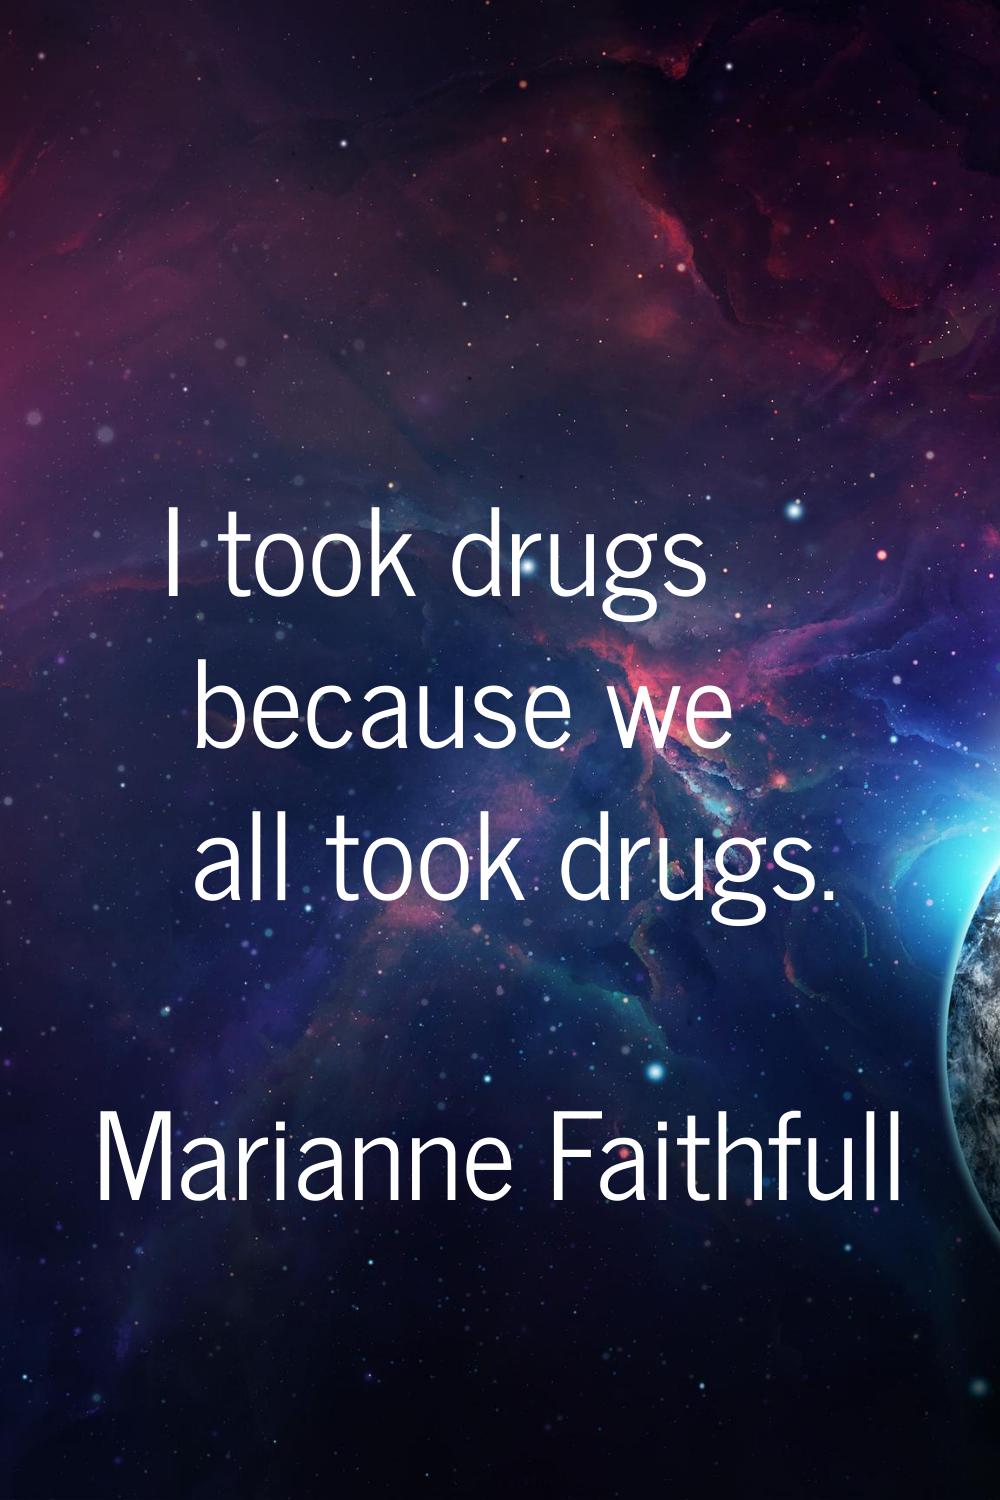 I took drugs because we all took drugs.